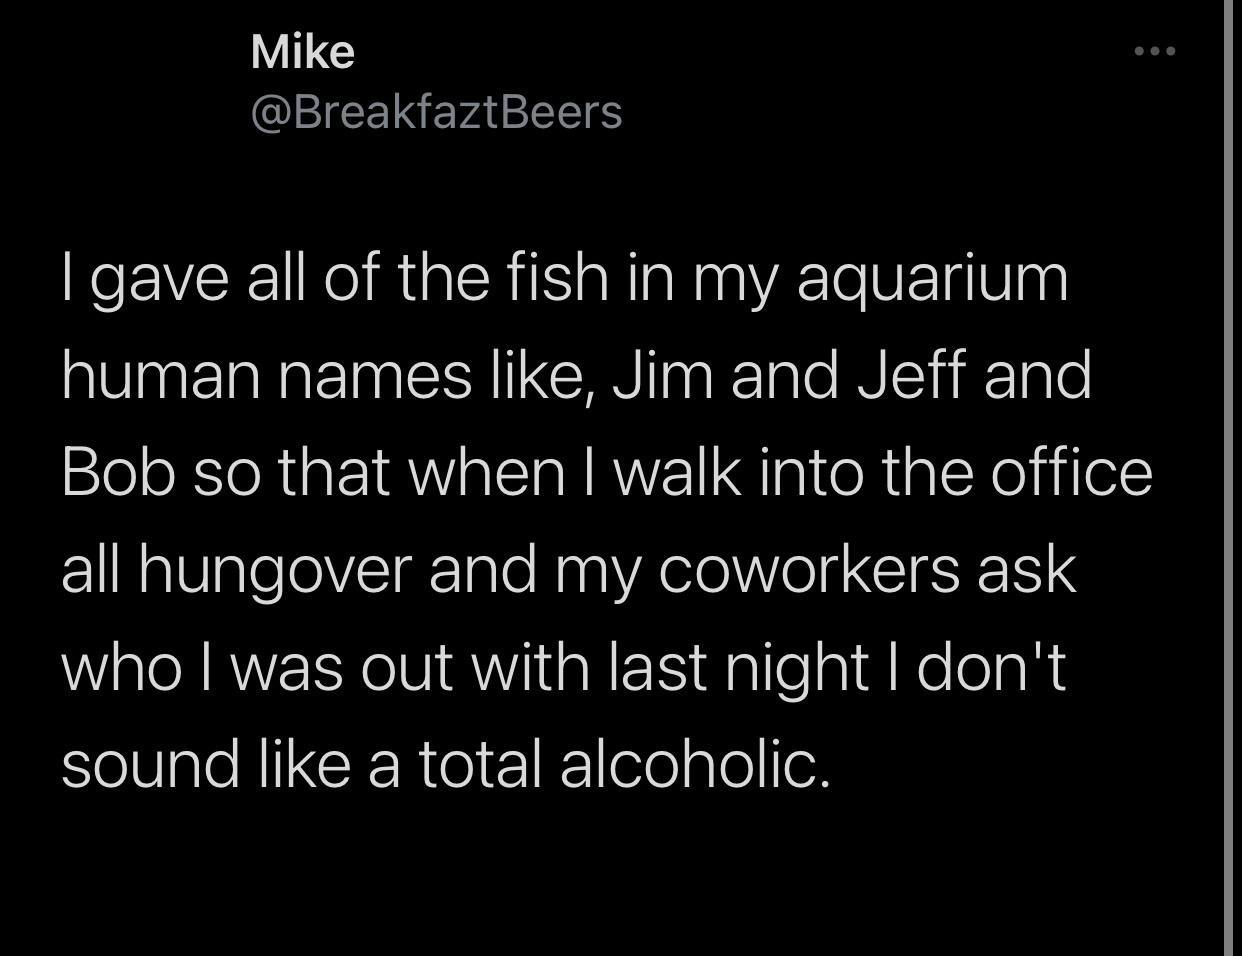 funniest tweets of the week - boy gave a girl 13 - Mike I gave all of the fish in my aquarium human names , Jim and Jeff and Bob so that when I walk into the office all hungover and my coworkers ask who I was out with last night I don't sound a total alco